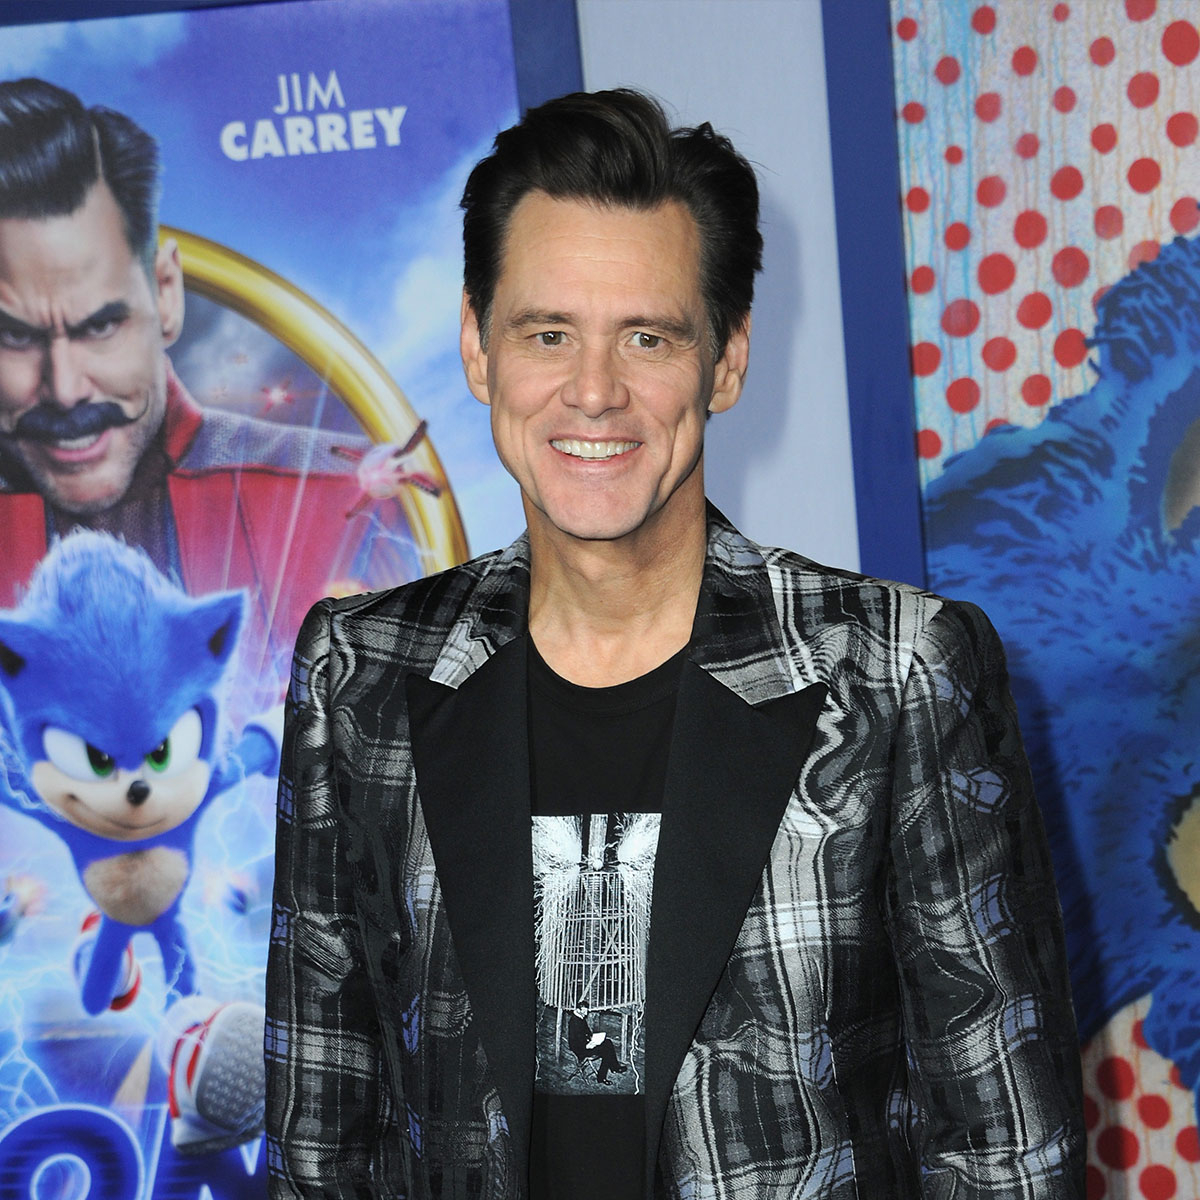 The 'Sonic the Hedgehog 2' Cast Deliver Their Best Jim Carrey Impressions 